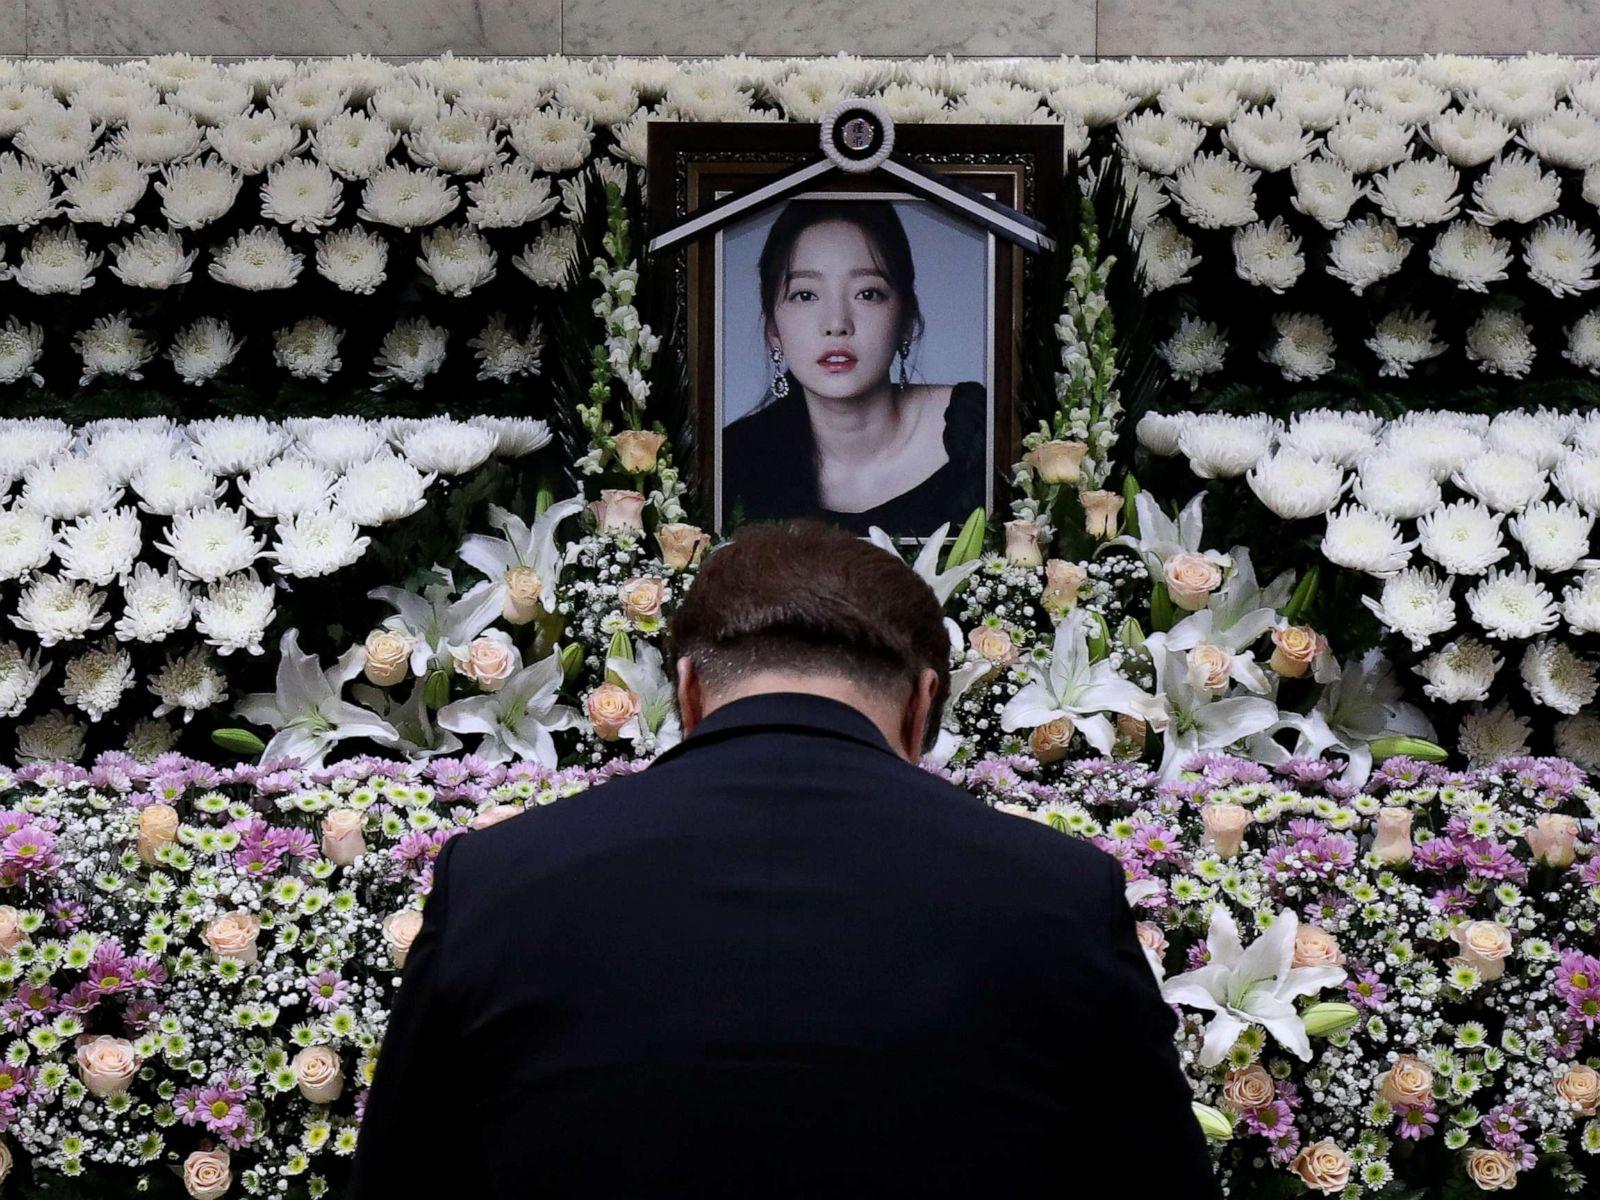 Deaths of Goo Hara and Sulli highlight tremendous pressures of K